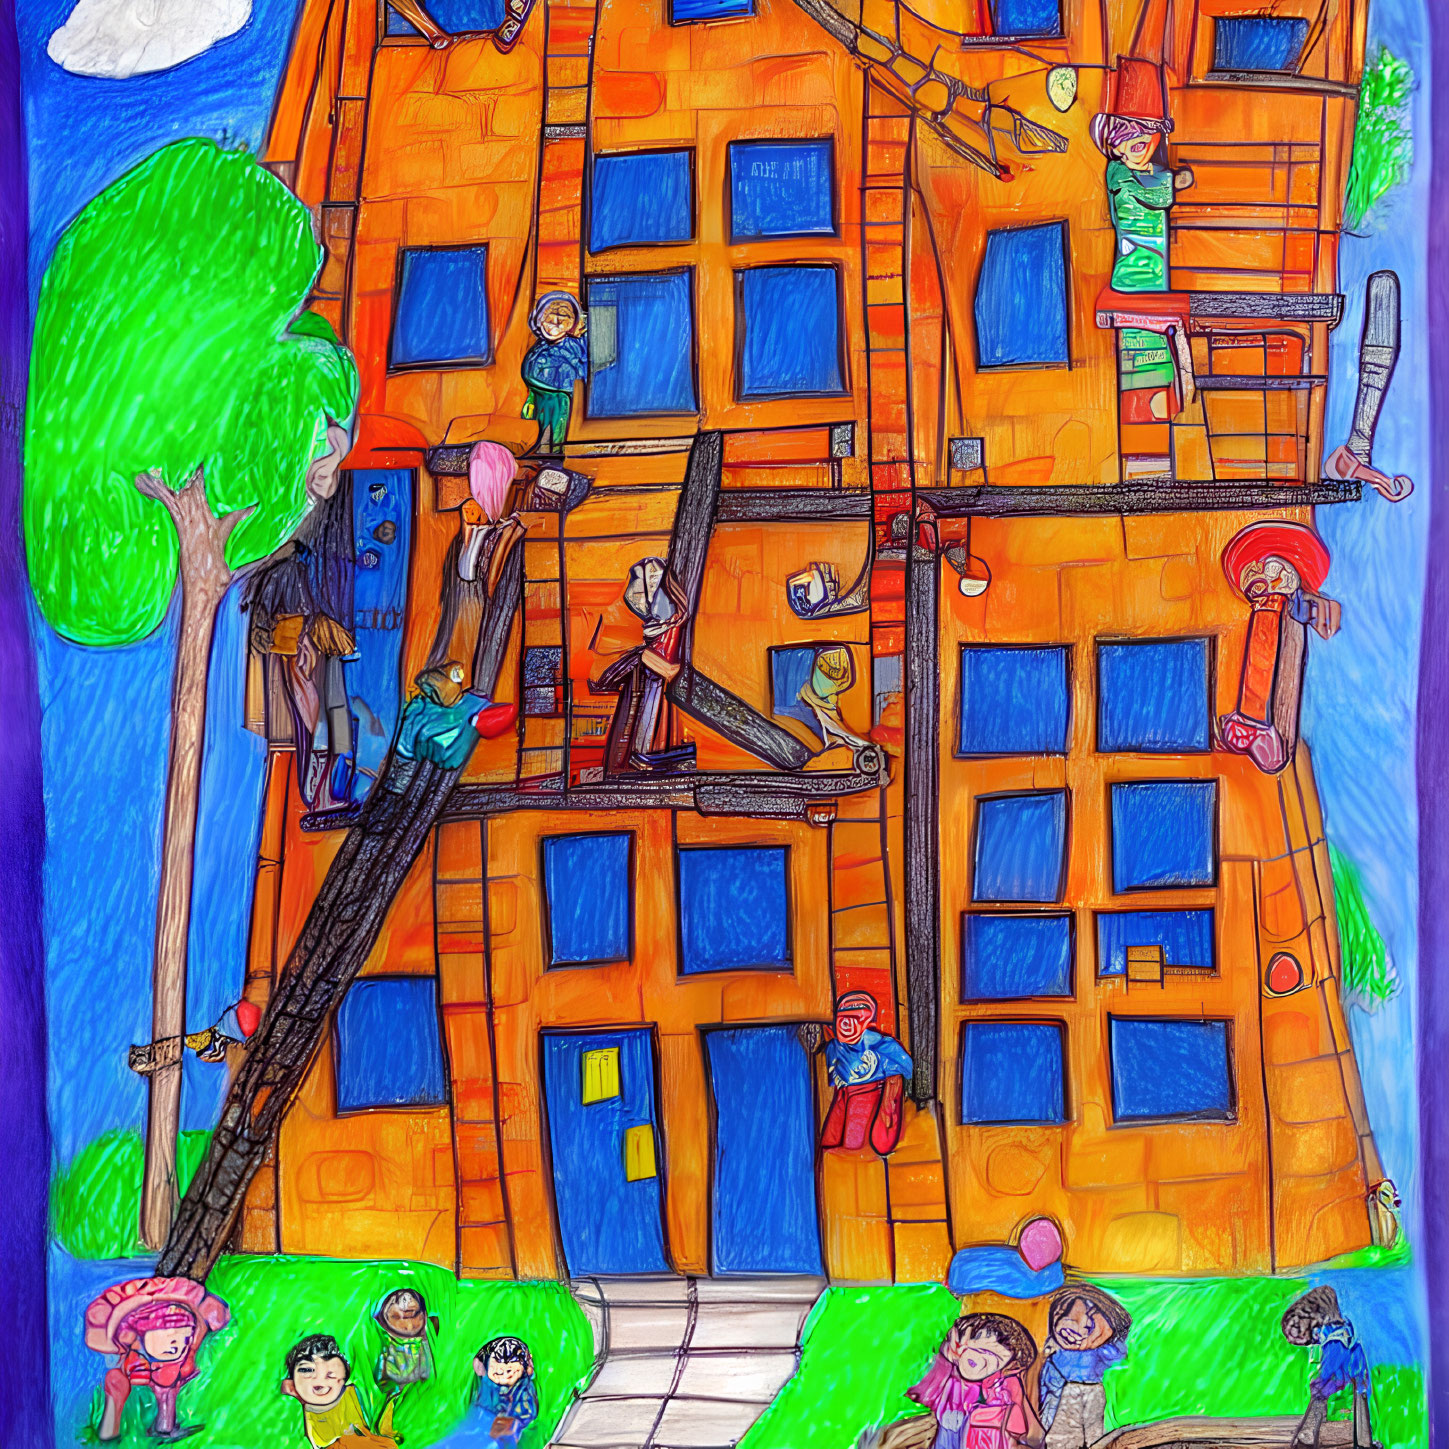 Colorful child-like drawing of people near tall orange building.